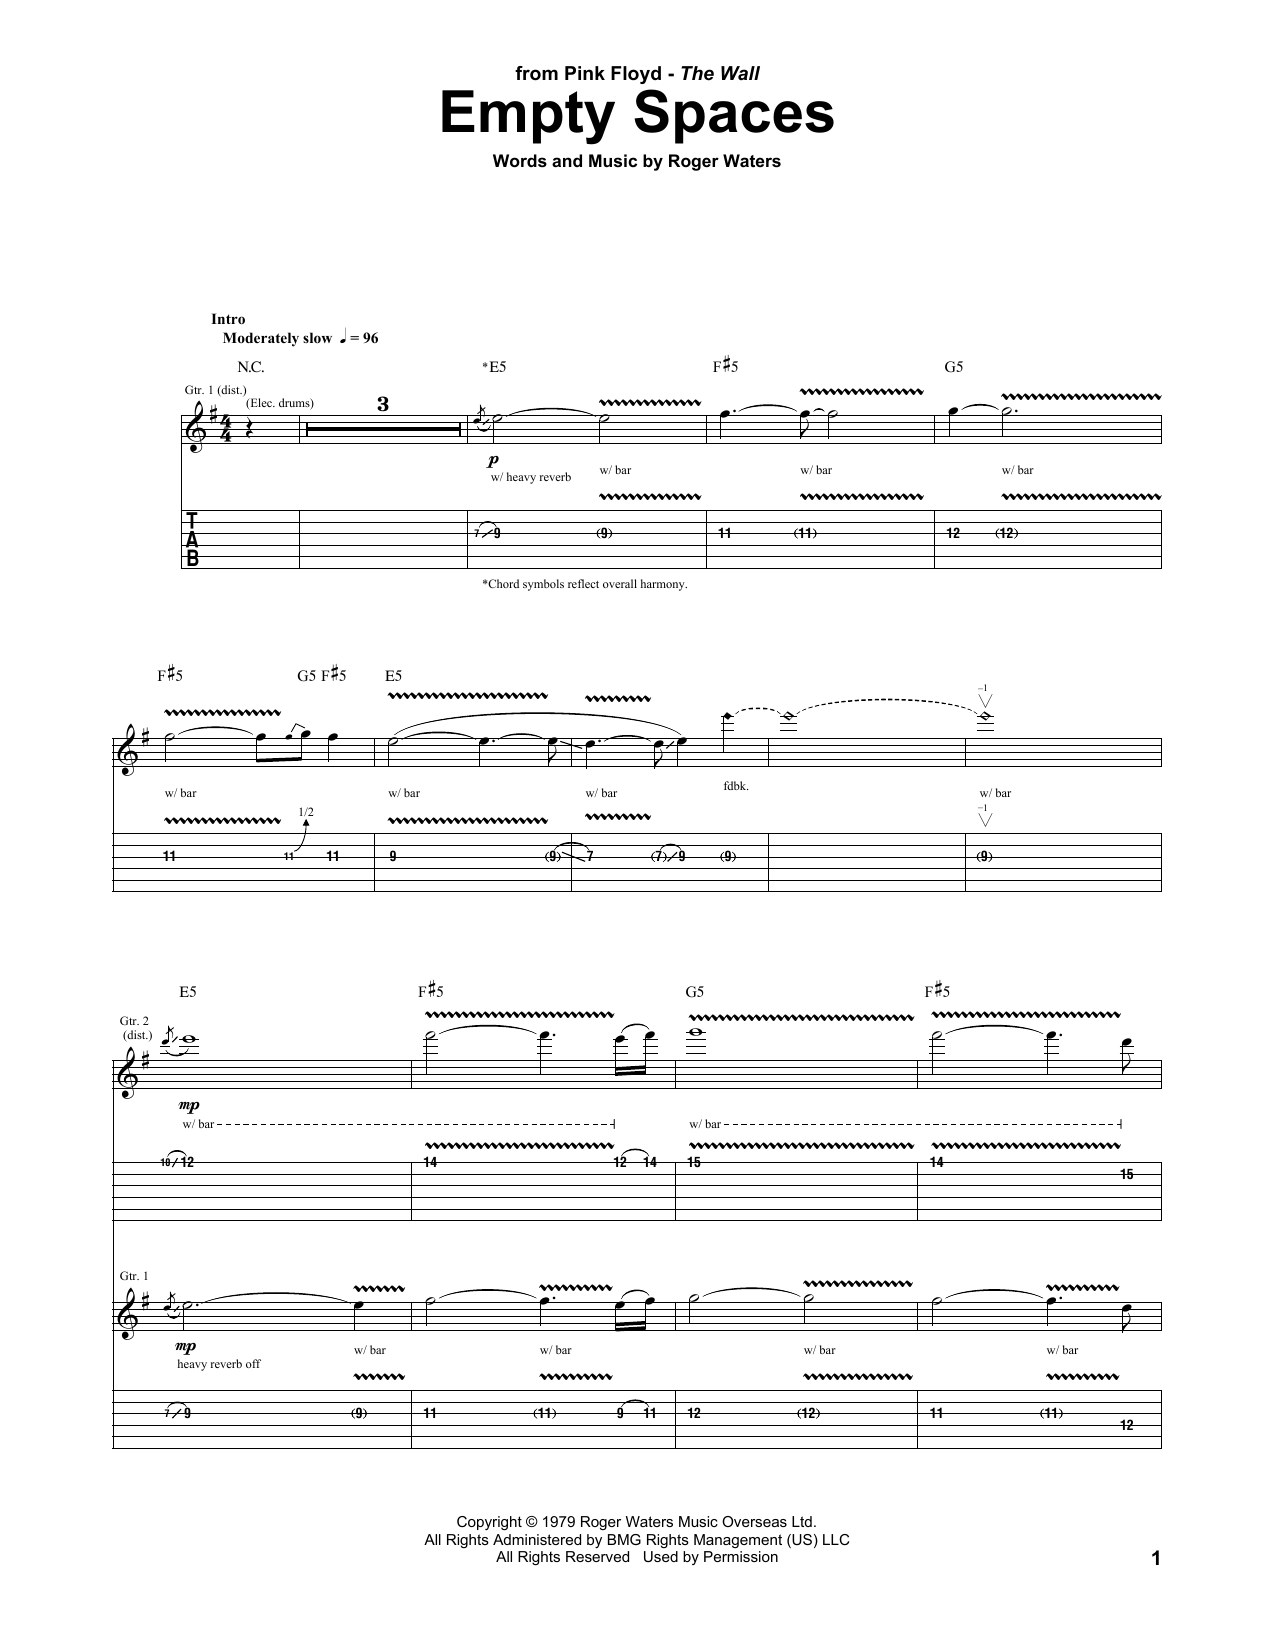 Download Pink Floyd Empty Spaces Sheet Music